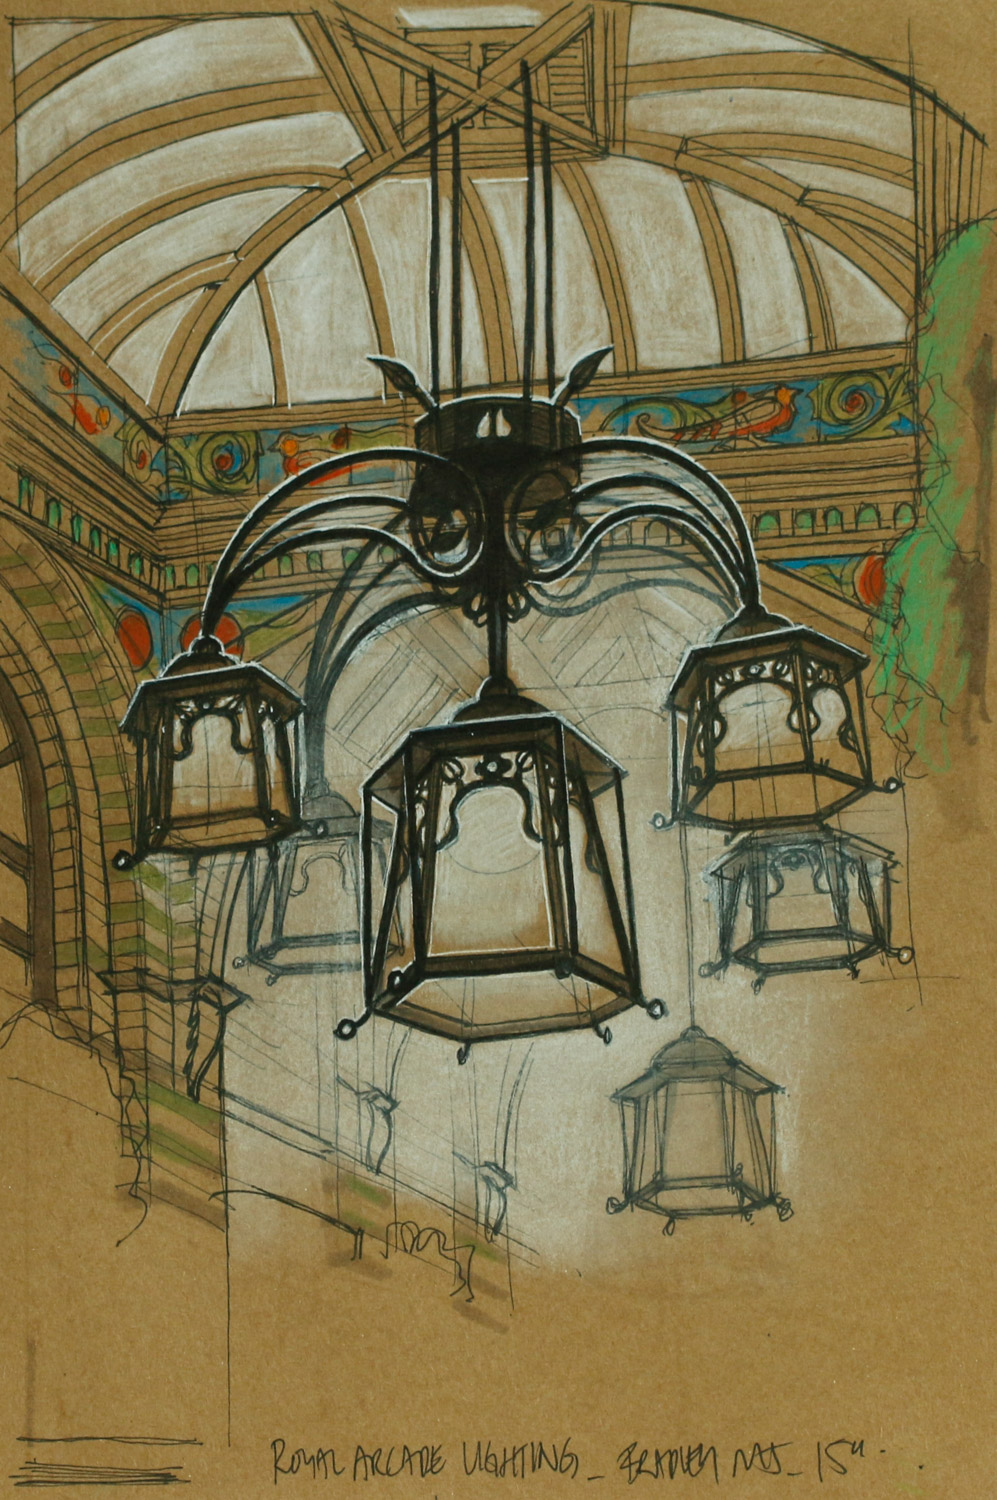 Artist Bradley Morgan Johnson - Royal Arcade Lighting, £330 8x12 Mixed Media on Paper at Paint Out Norwich 2015